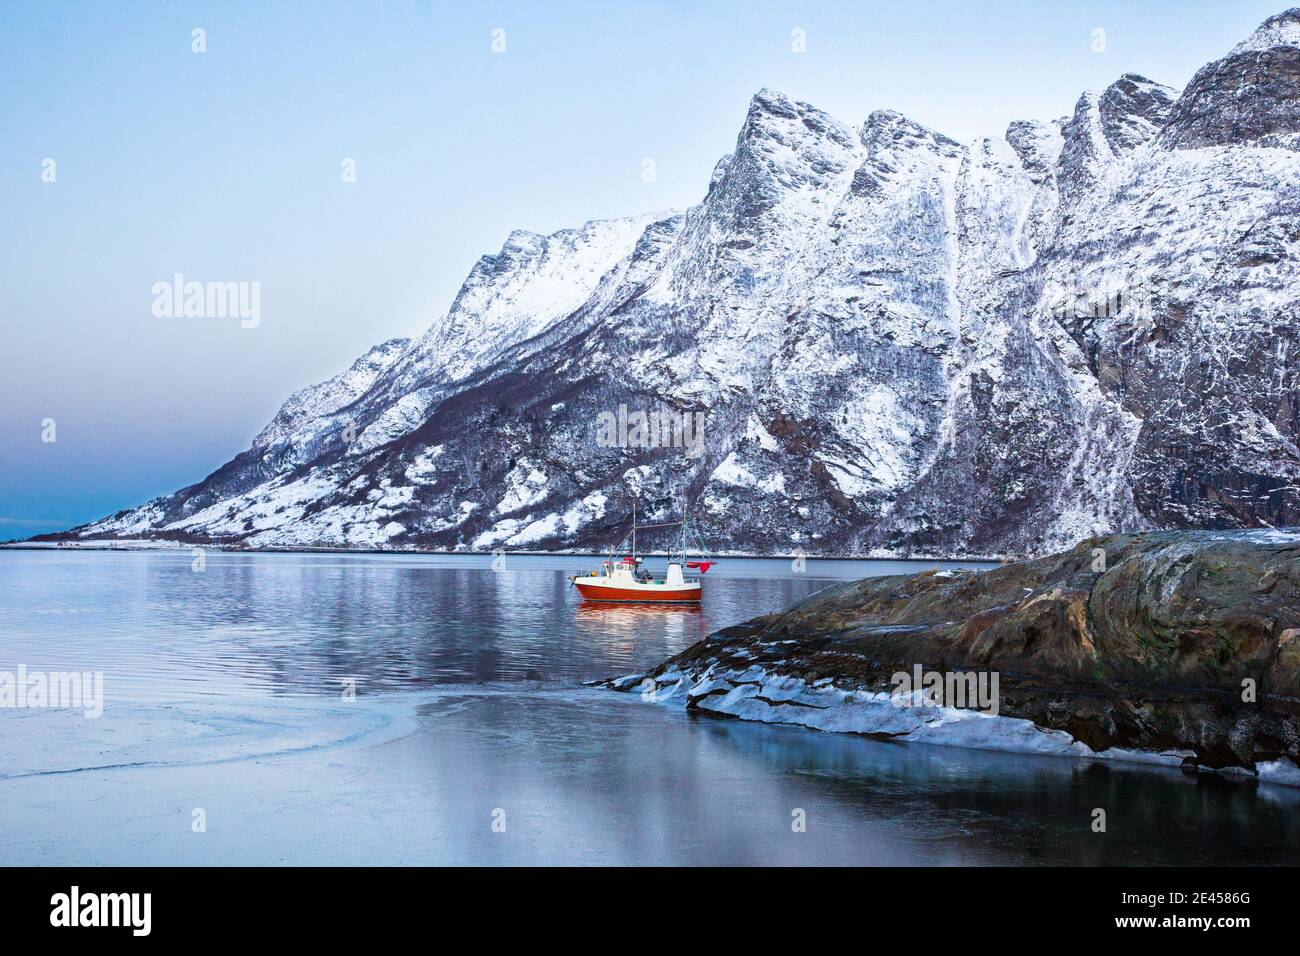 A small Norwegian fishing boat is nestled in a fjord. Stock Photo